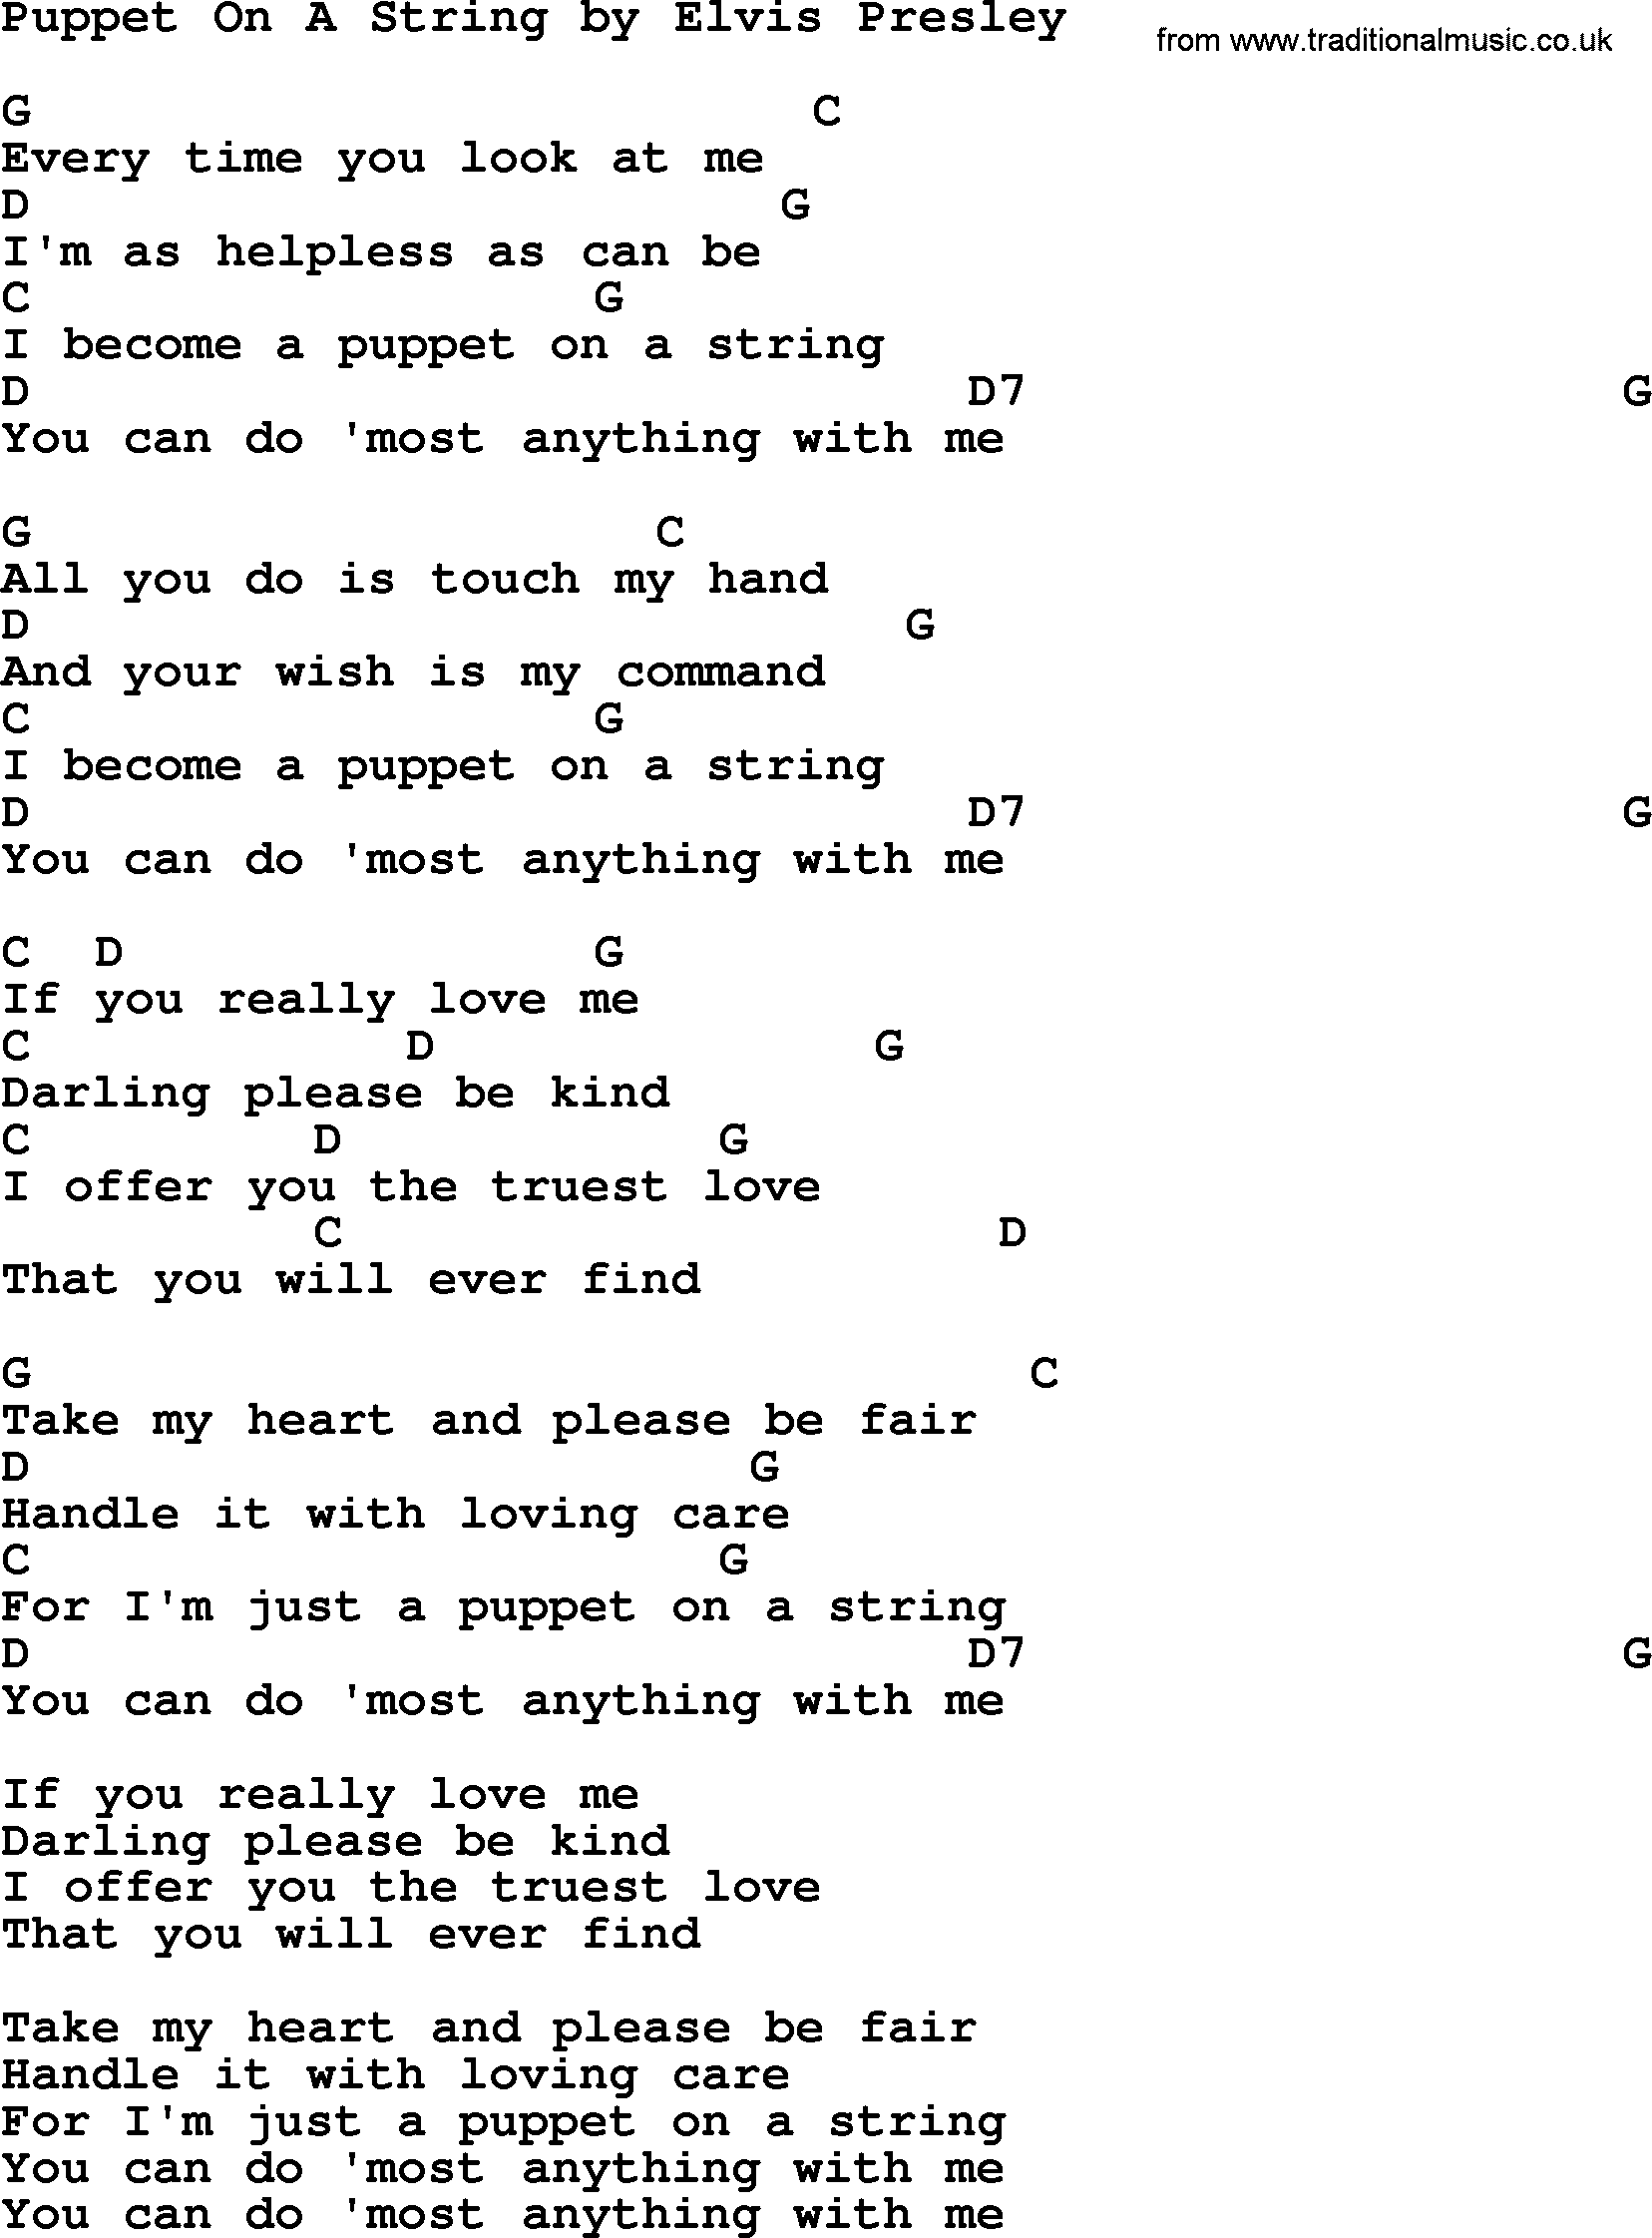 Elvis Presley song: Puppet On A String, lyrics and chords